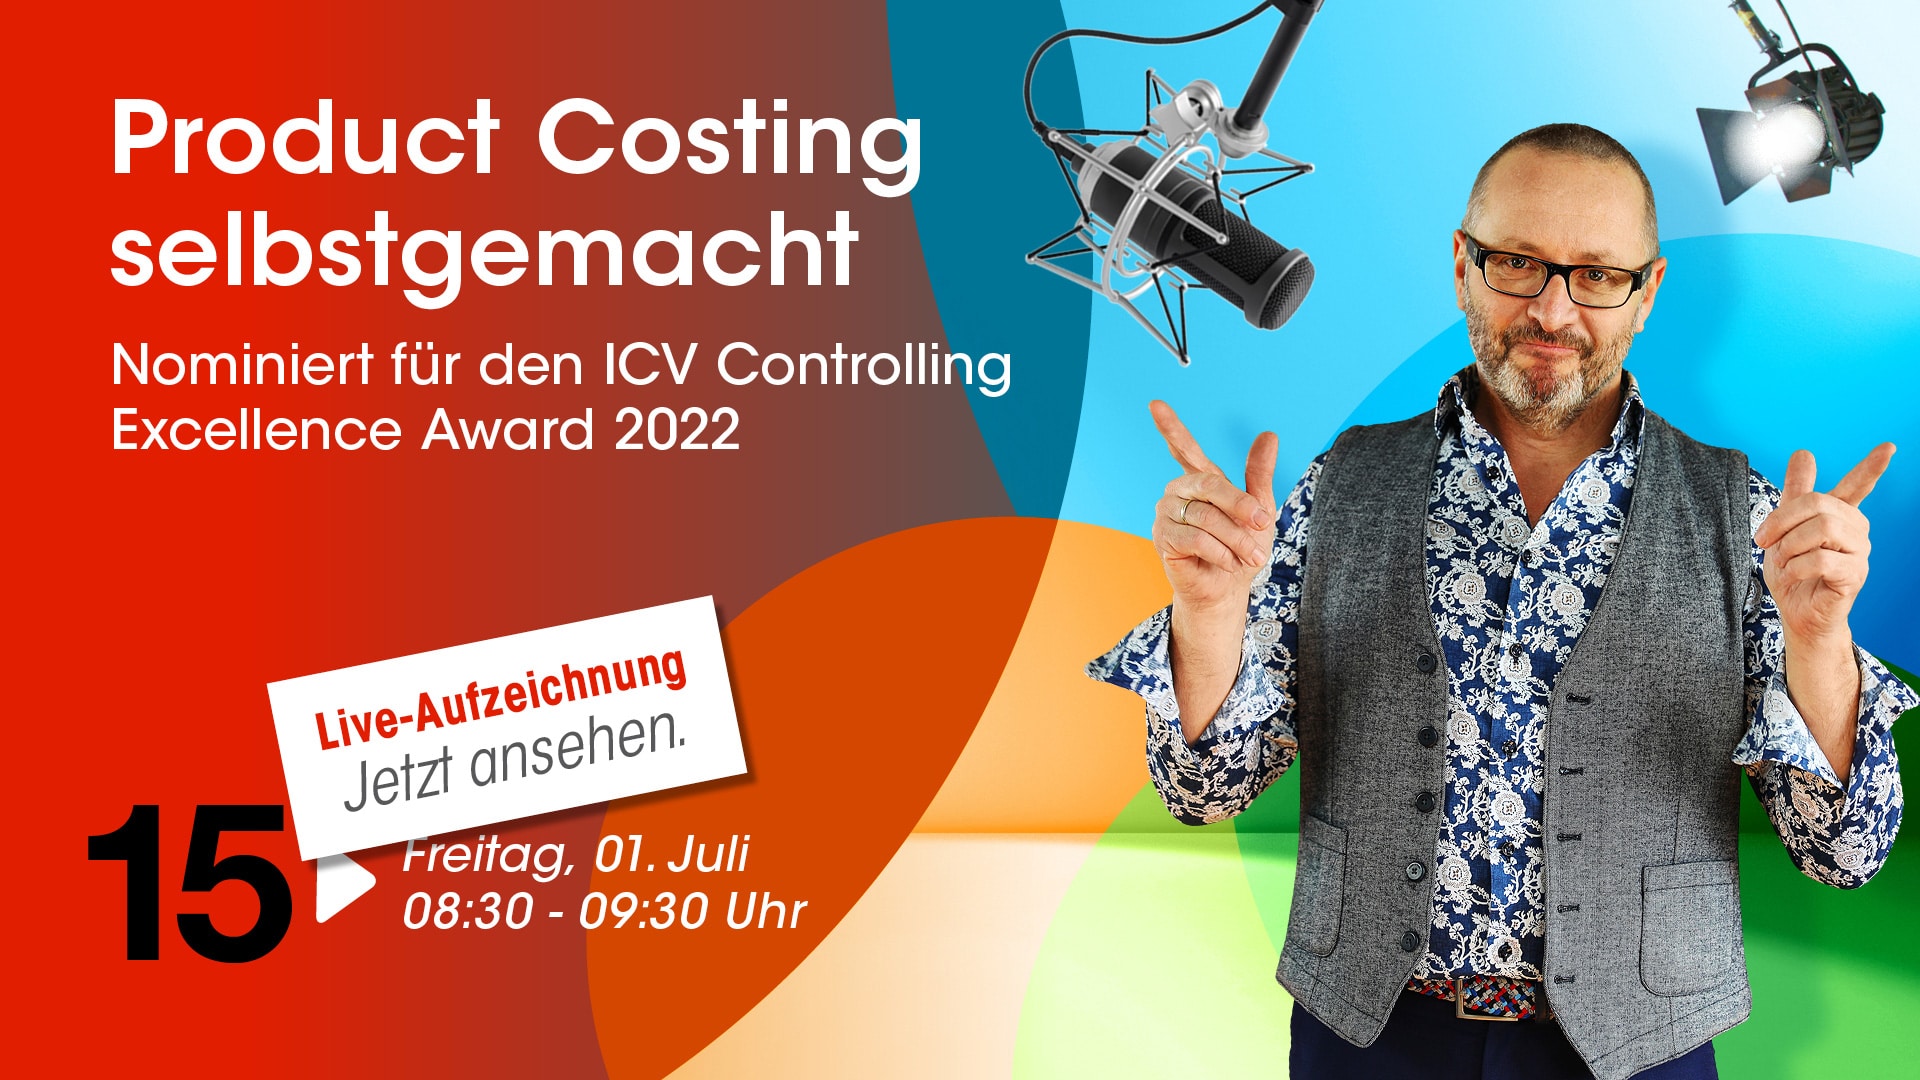 CA iTalk - Product Costing selbstgemacht